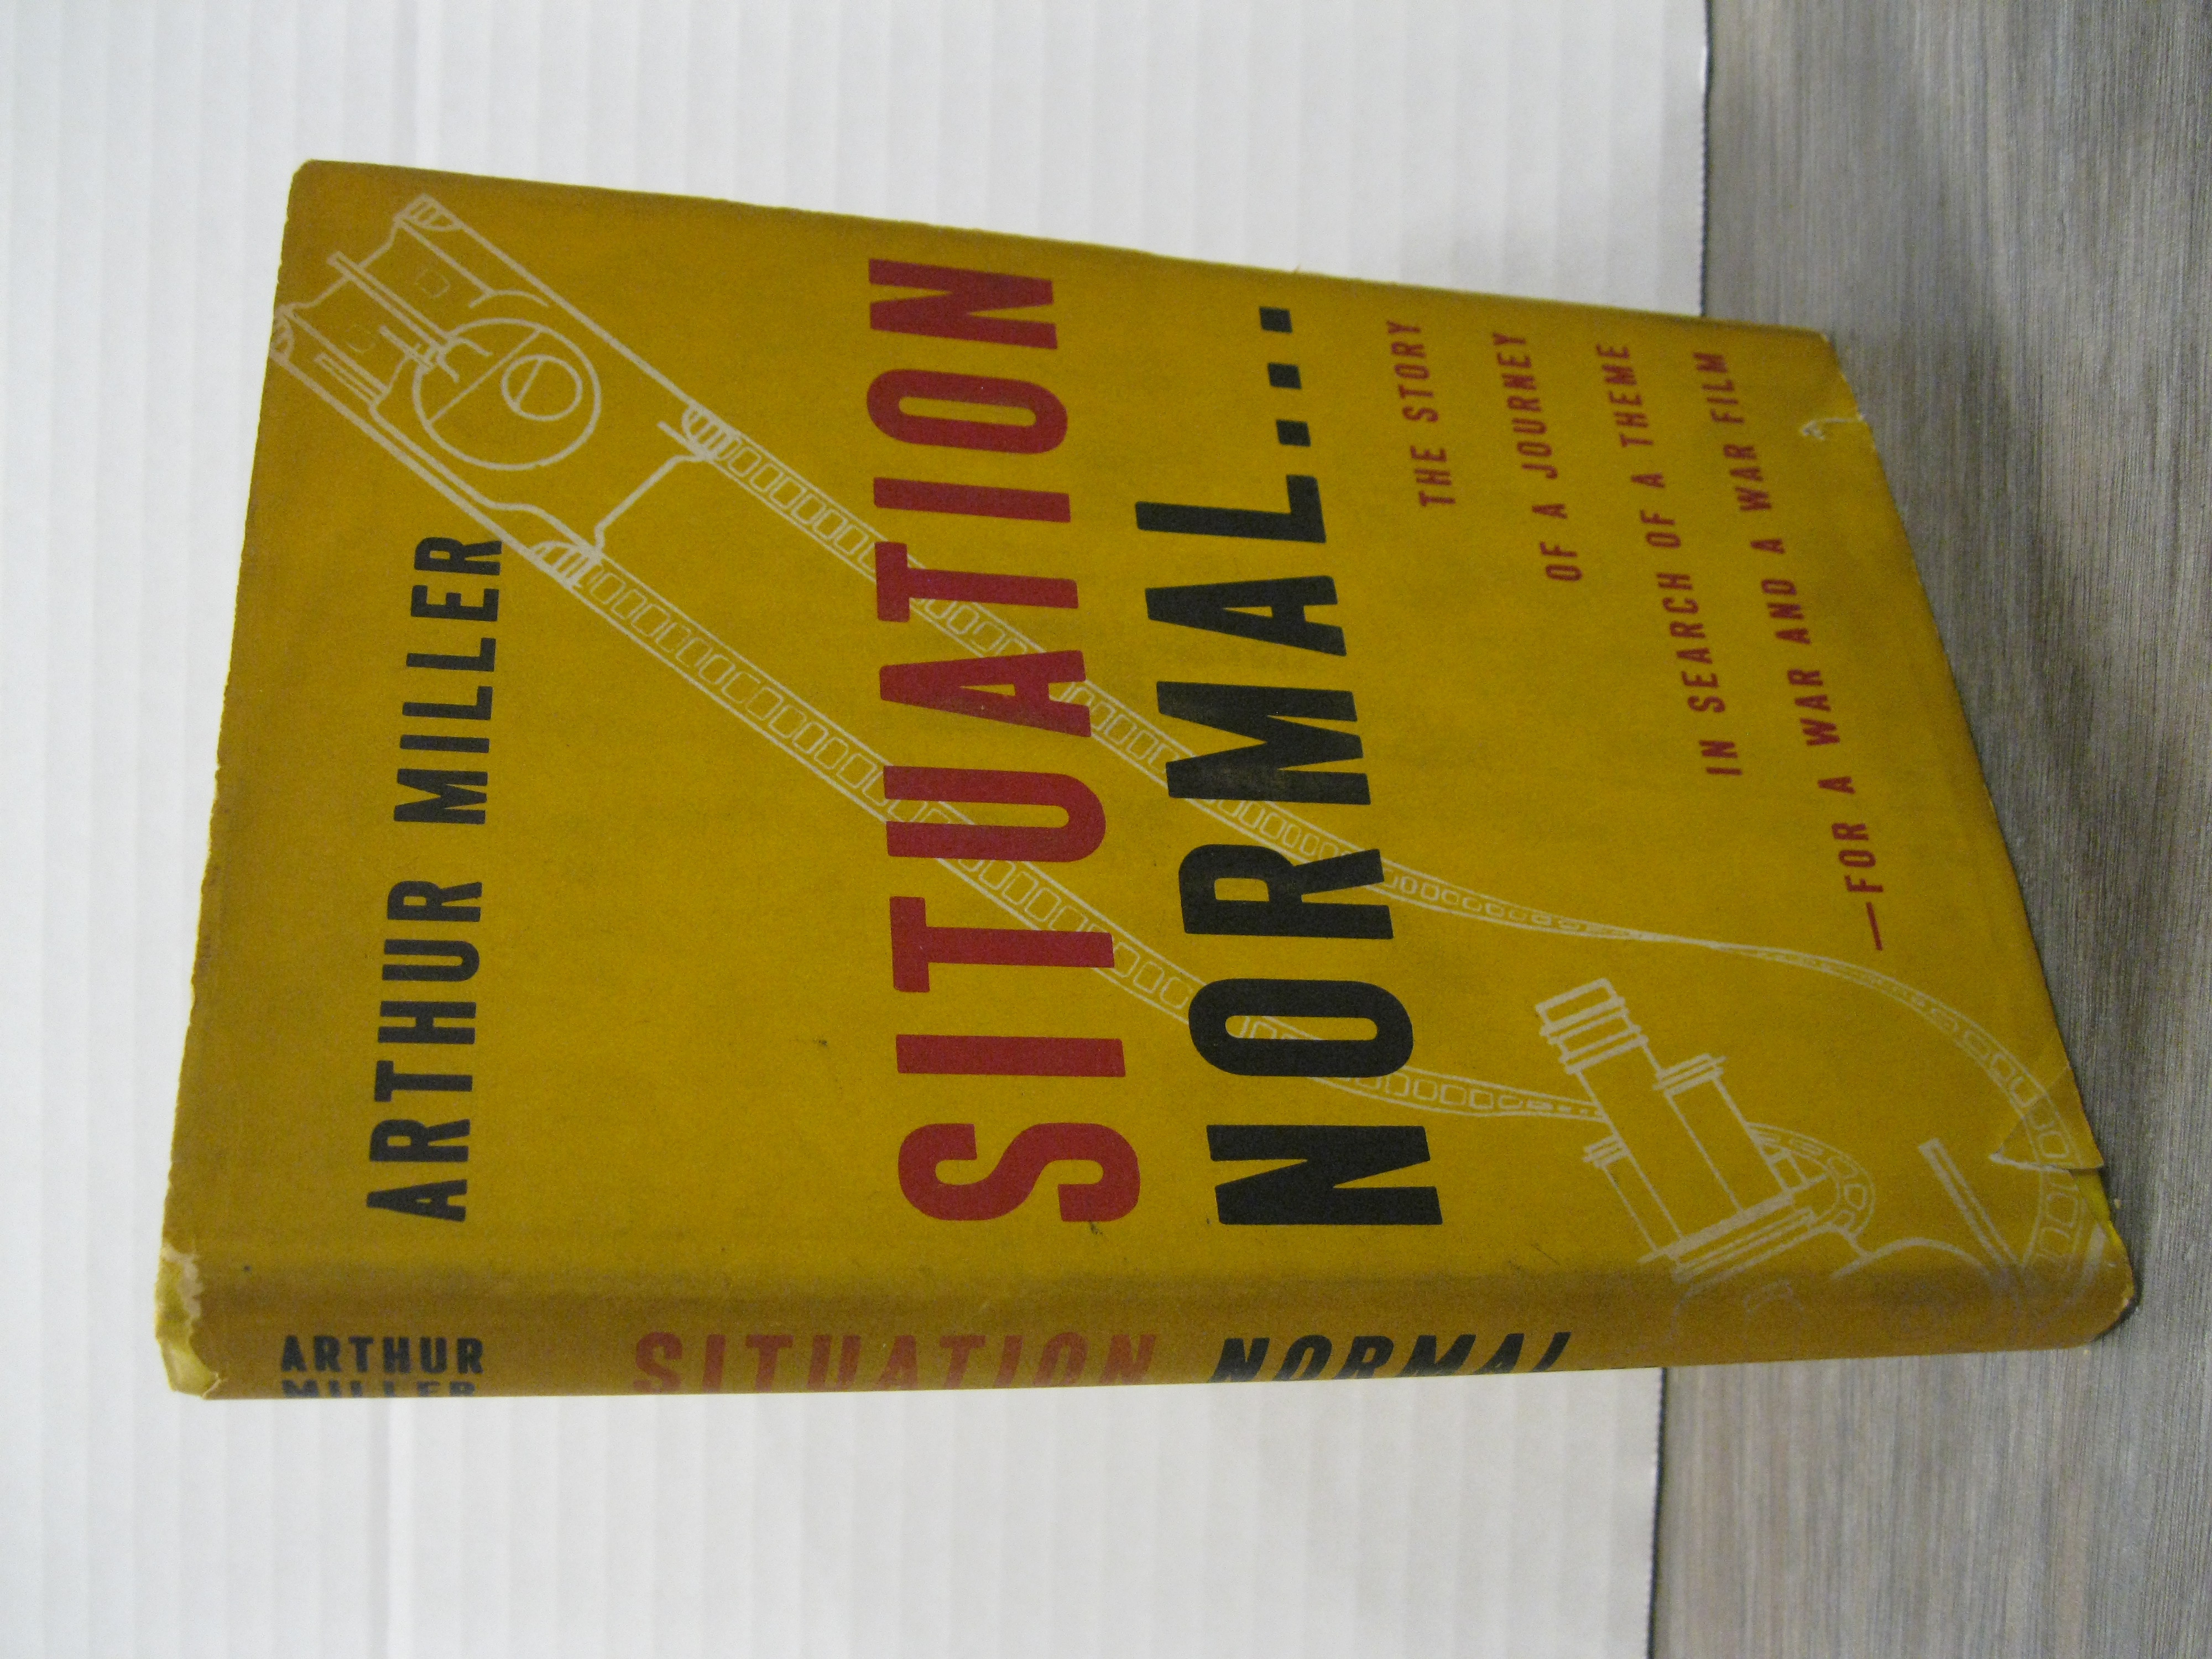 SITUATION NORMAL.THE STORY OF A JOURNEY IN SEARCH OF A THEME - FOR A WAR AND A WAR FILM *SIGNED* MILLER, ARTHUR [Very Good] [Hardcover] pp: 179. SIGNED FIRST EDITION. Yellow cloth covered boards, with red and black lettering on the spine and front board. A work of non-fiction by Miller that describes army life on military bases. He had written several plays before this book but this is his first published book (Ahearn, Collected Books, 1997). Printed on the cheaper war time paper. This copy has been inscribed on the free endpaper  To----Britton/Arthur Miller/Aug/53 . The yellow boards have some darkening in the centre (both front and back) that appears to have been a dye transfer. Although visible the darkening is not serious. The spine ends and corners are bumped and the top edge is soiled. The dust jacket has obvious darkening and soiling. There is about one-quarter inch chipped at the head of the spine, smaller chipping and a couple of short, closed tears on the extremities. Overall, a very good copy of this author's scarce first book, signed by Miller. The images should show these faults. Please inquiry is more photos are required.